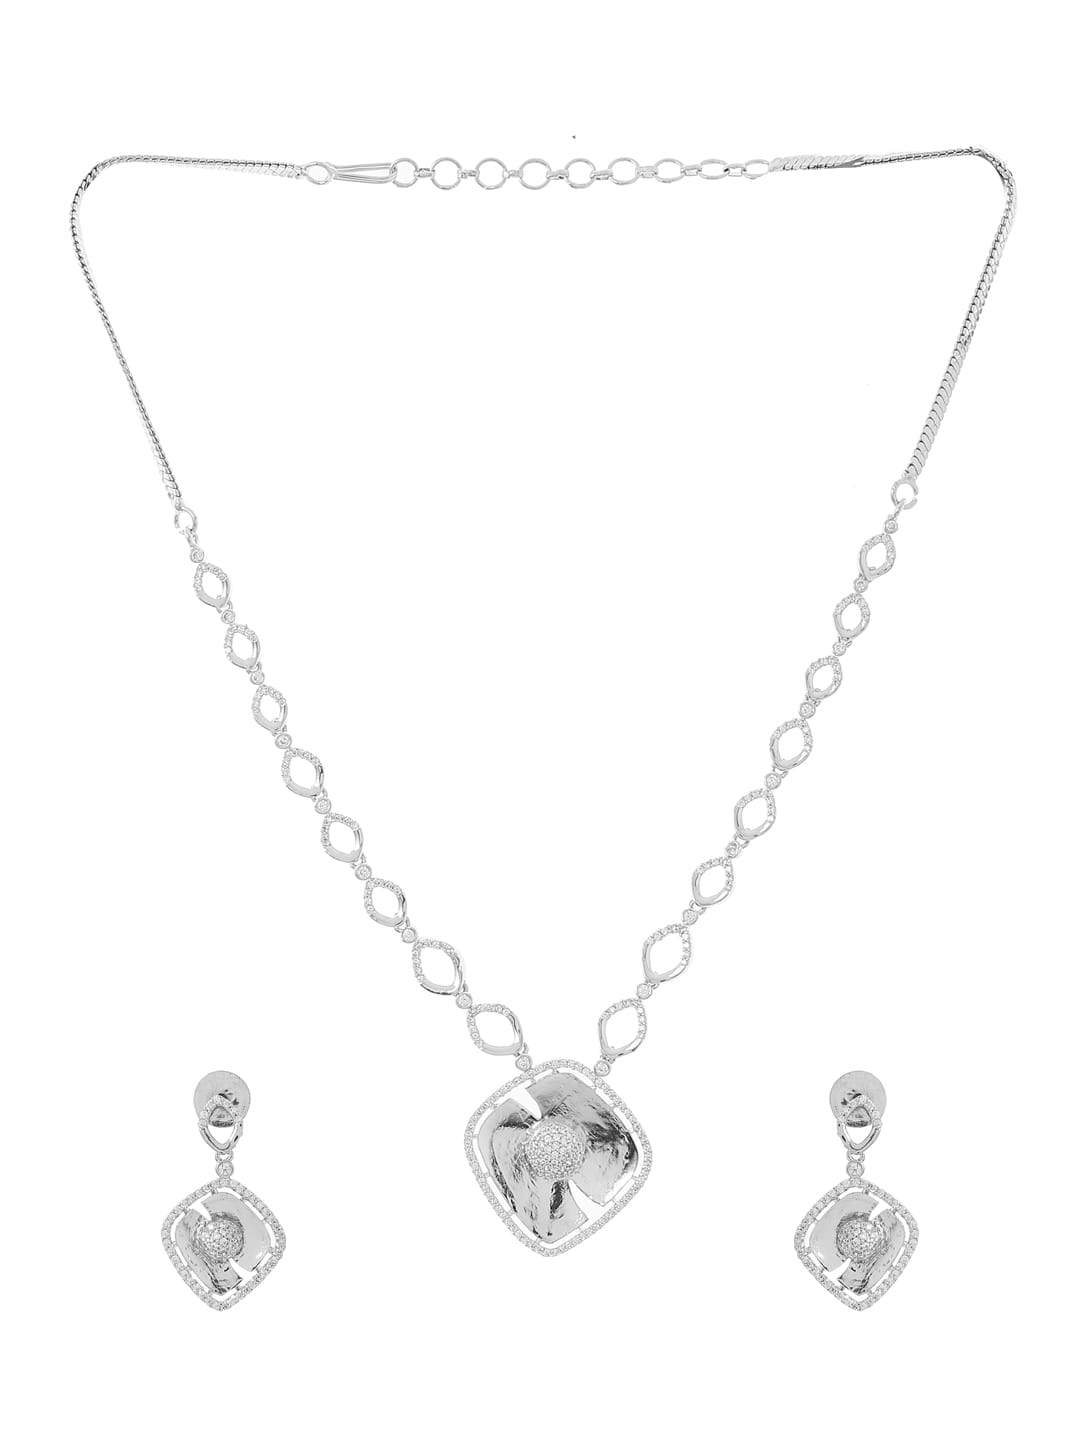 silver-plated-diamond-chain-pendant-necklace-with-earrings-viraasi